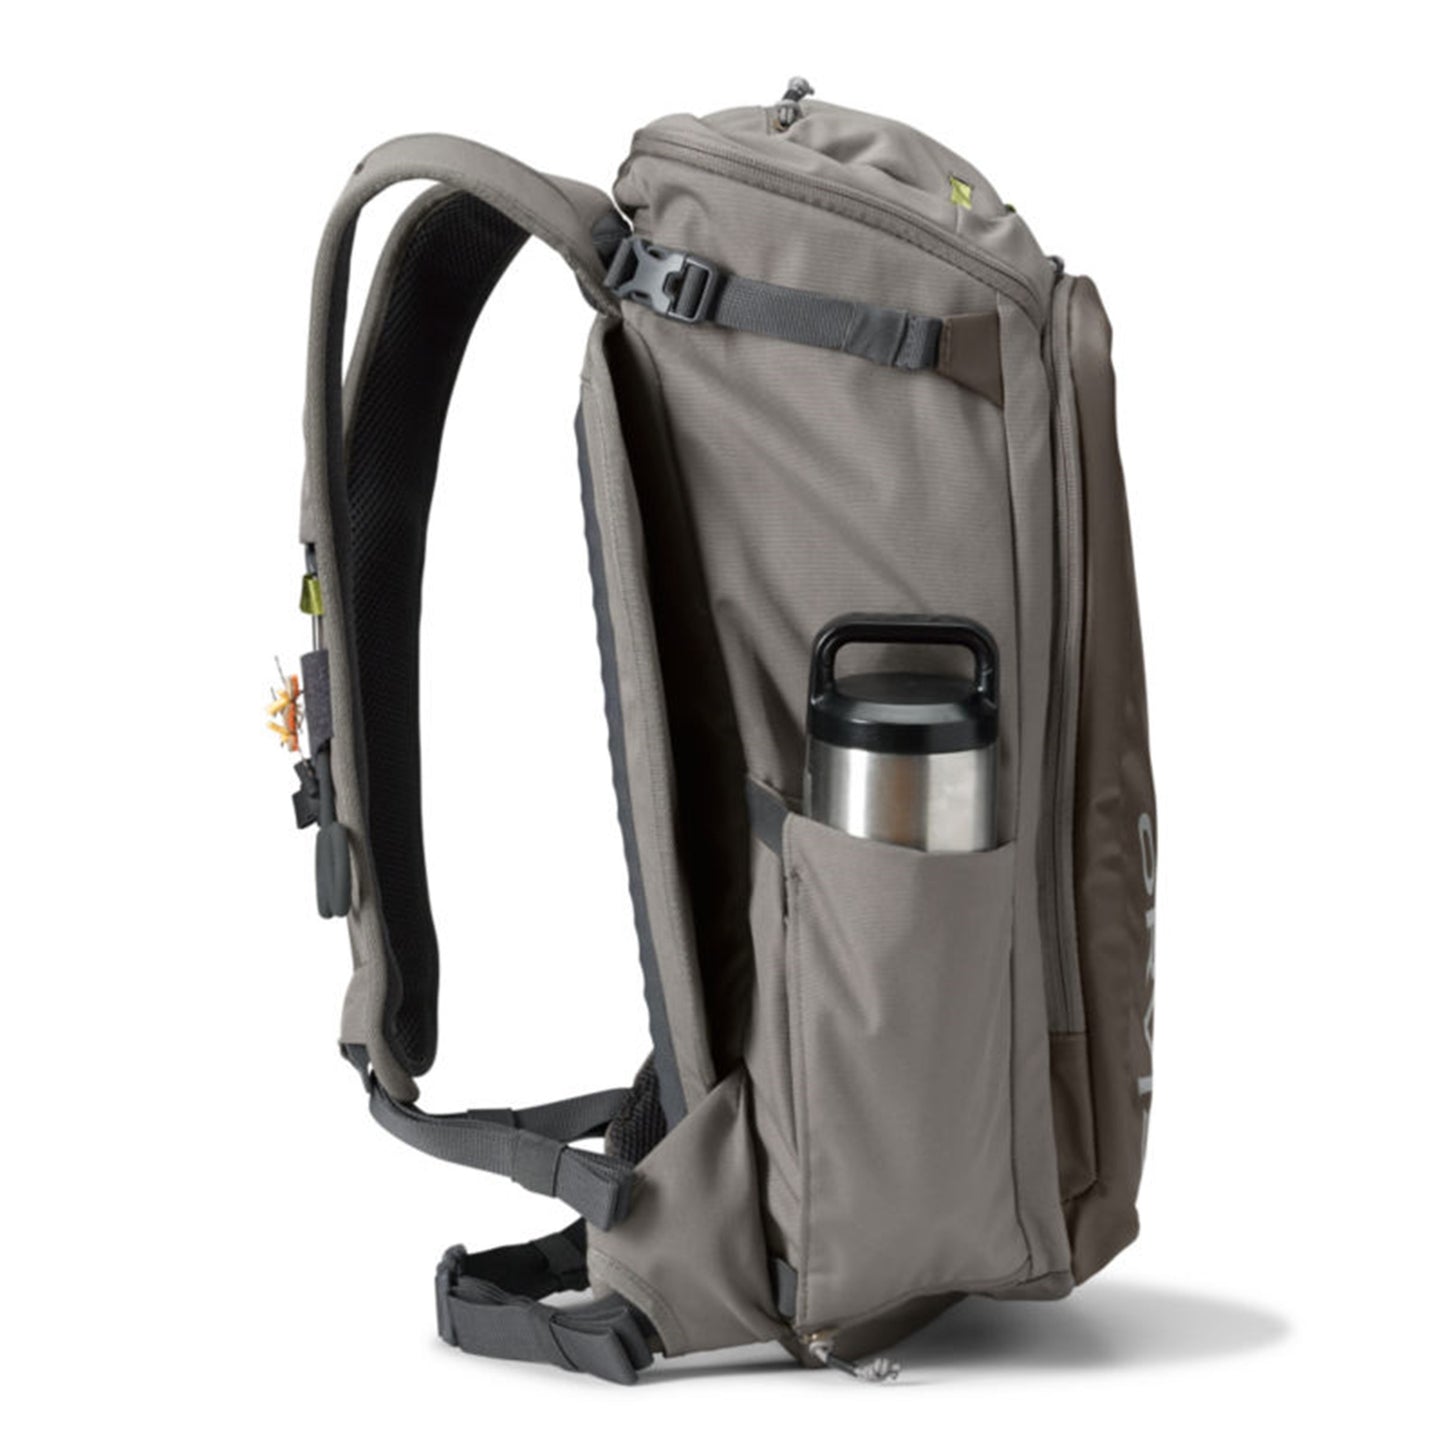 ORVIS Bug-Out Backpack